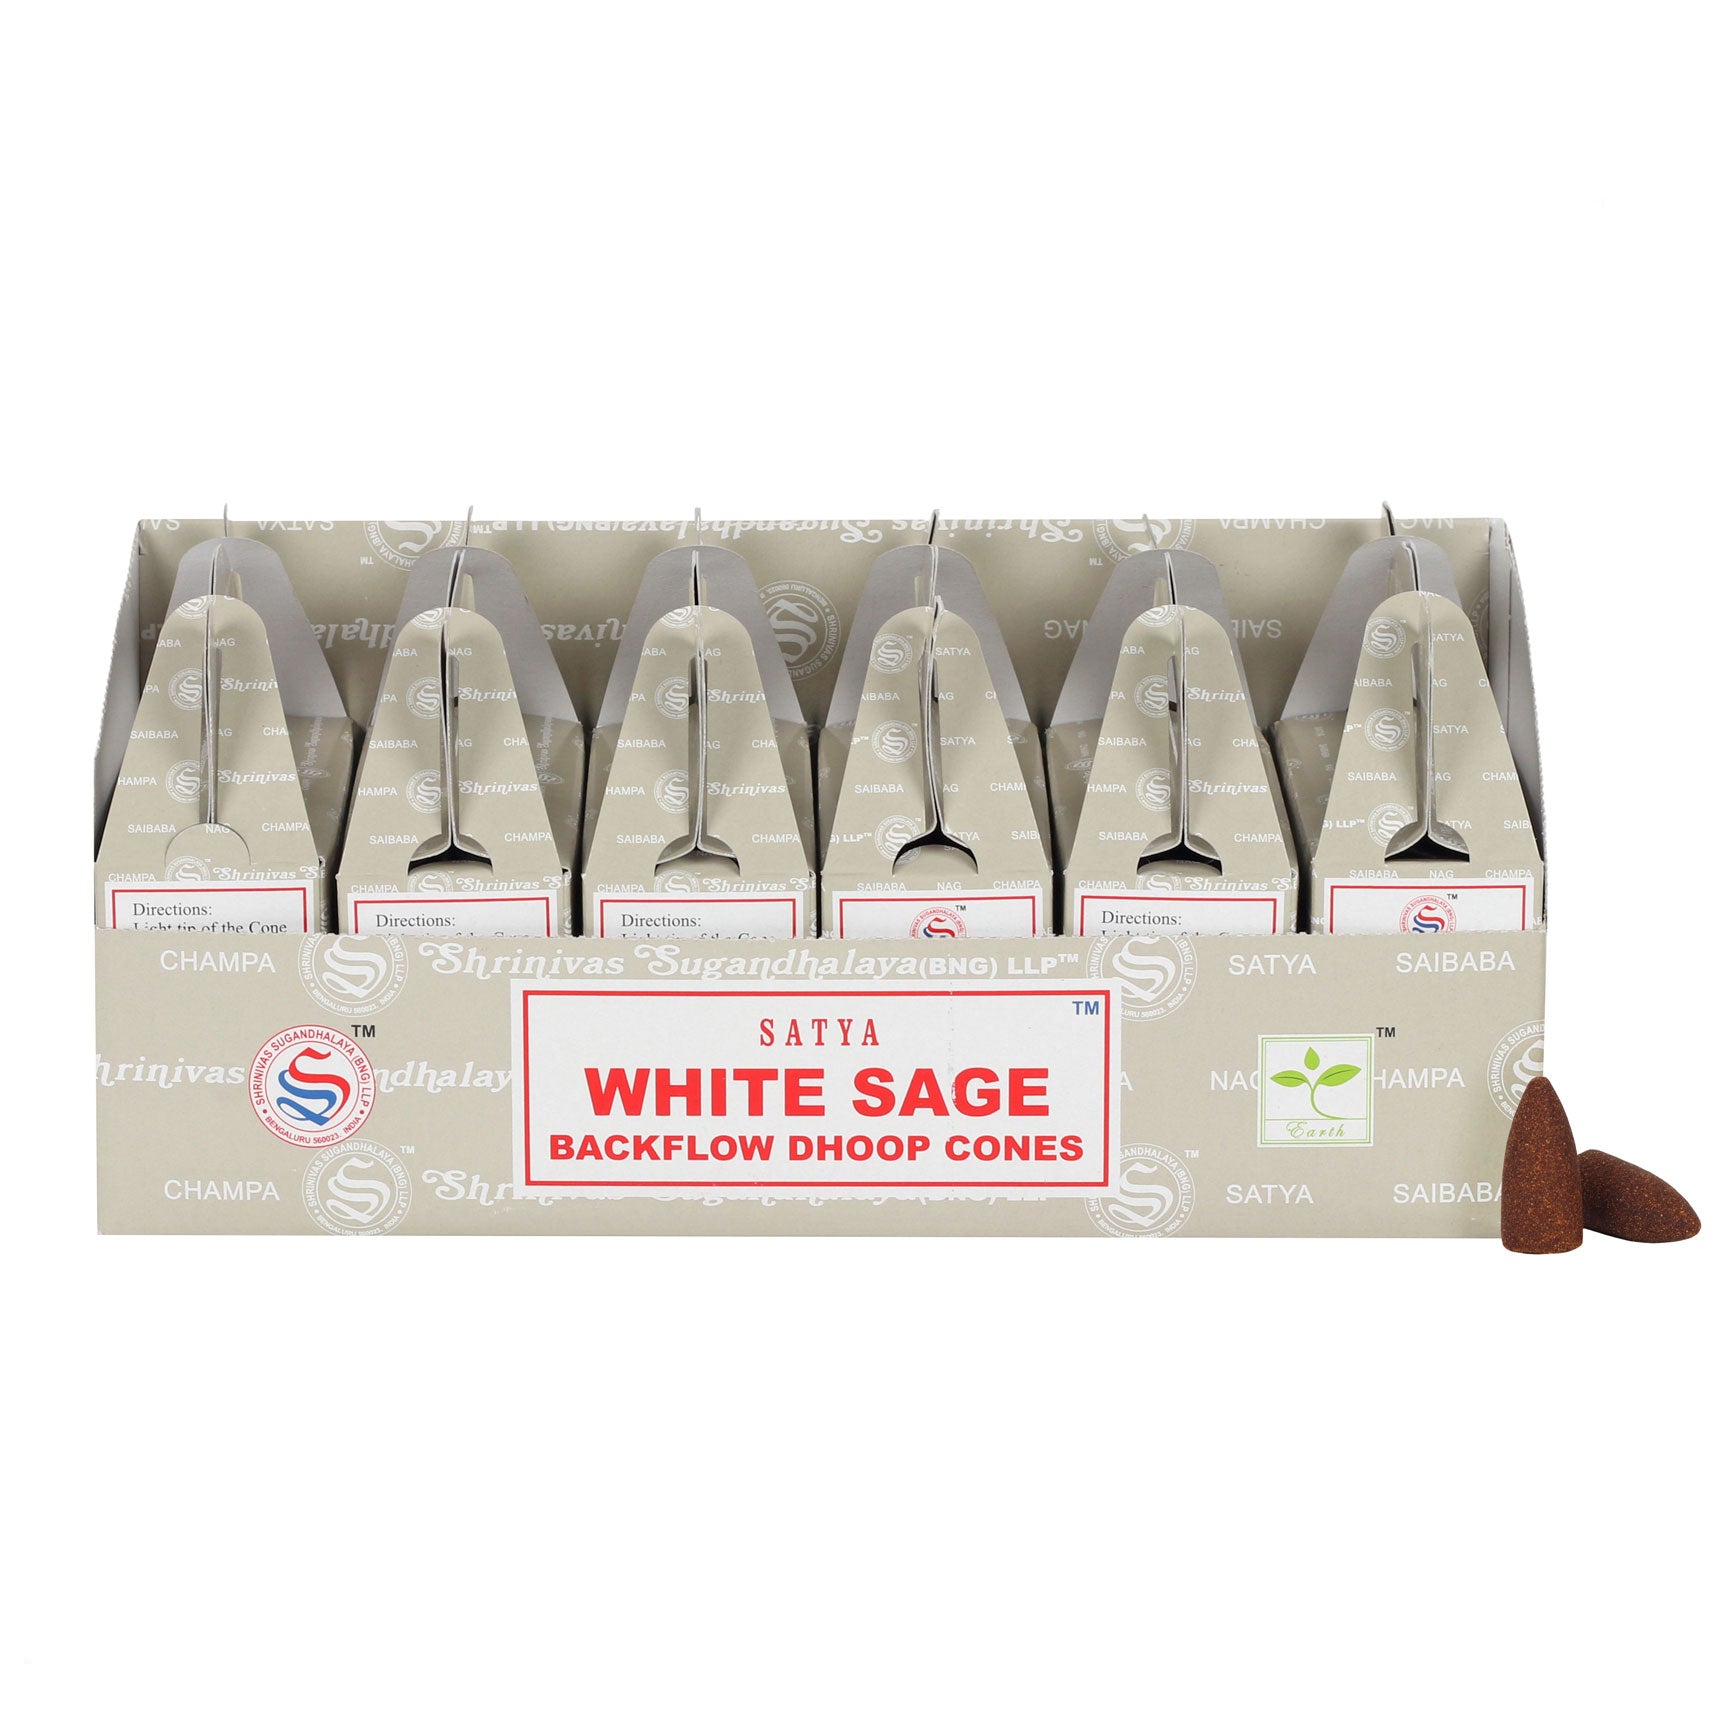 View Set of 6 Packets of Satya White Sage Backflow Dhoop Cones information